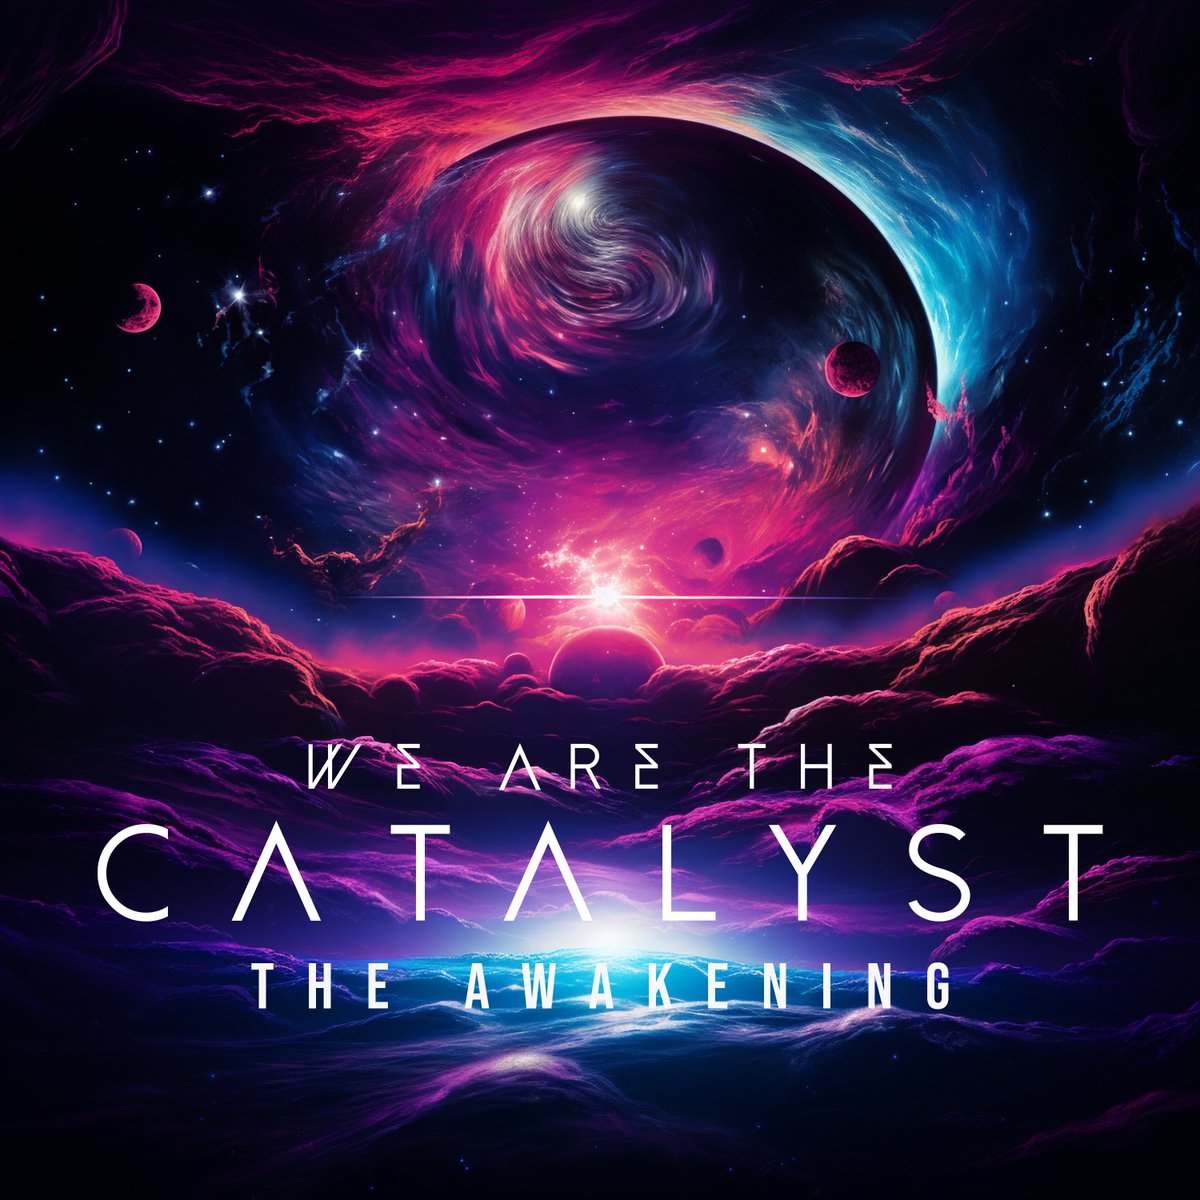 🔥 It´s out! 🔥 What we´ve all been waiting for - The official soundtrack to the end of the universe - 'The Awakening'! Check it out on your favourite music site with the link below! hypeddit.com/wearethecataly…